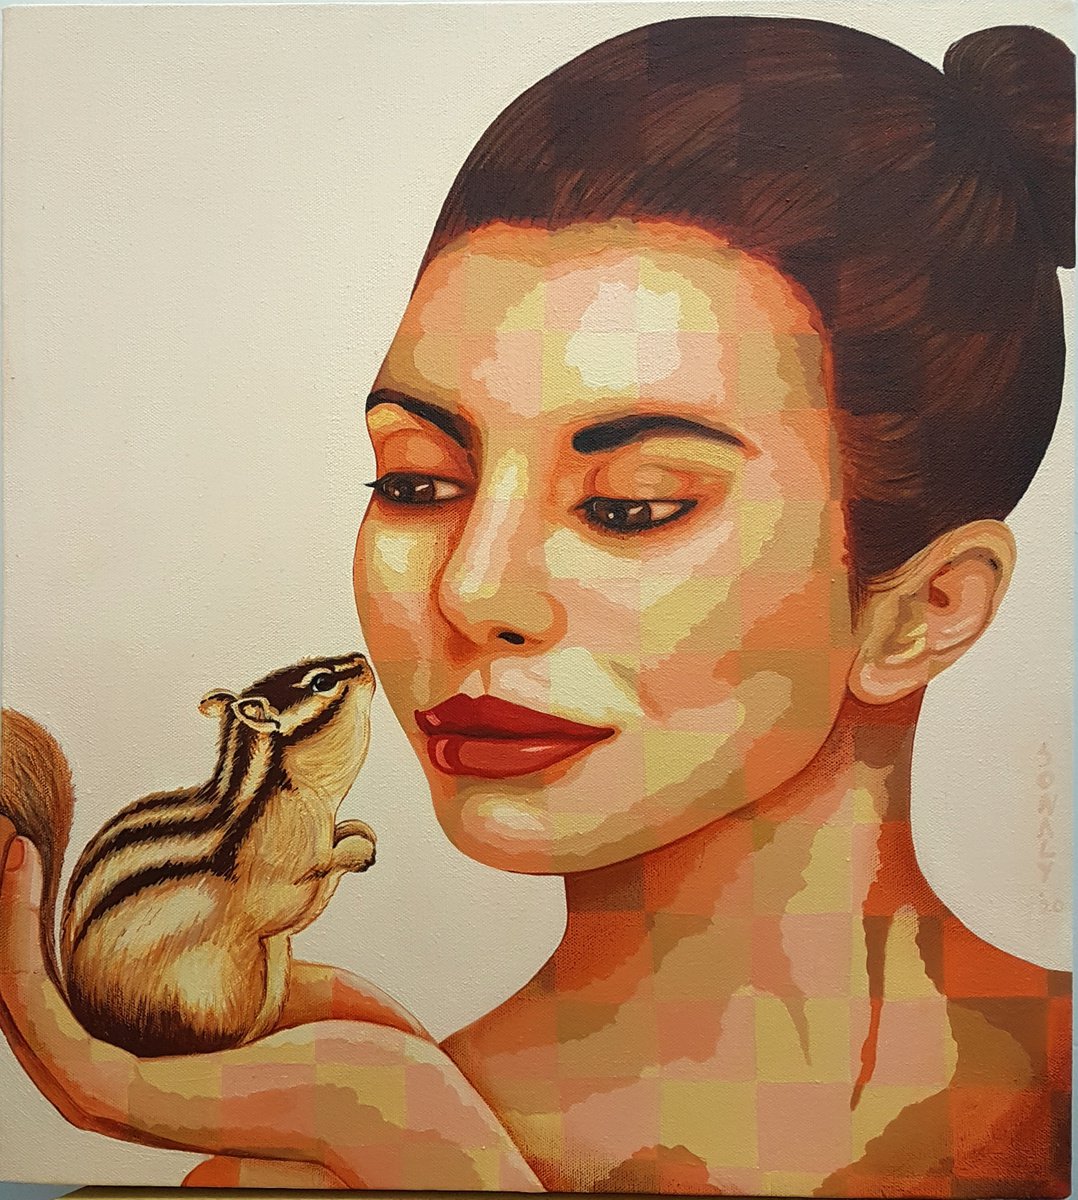 Lady and Squirrel by Sonaly Gandhi